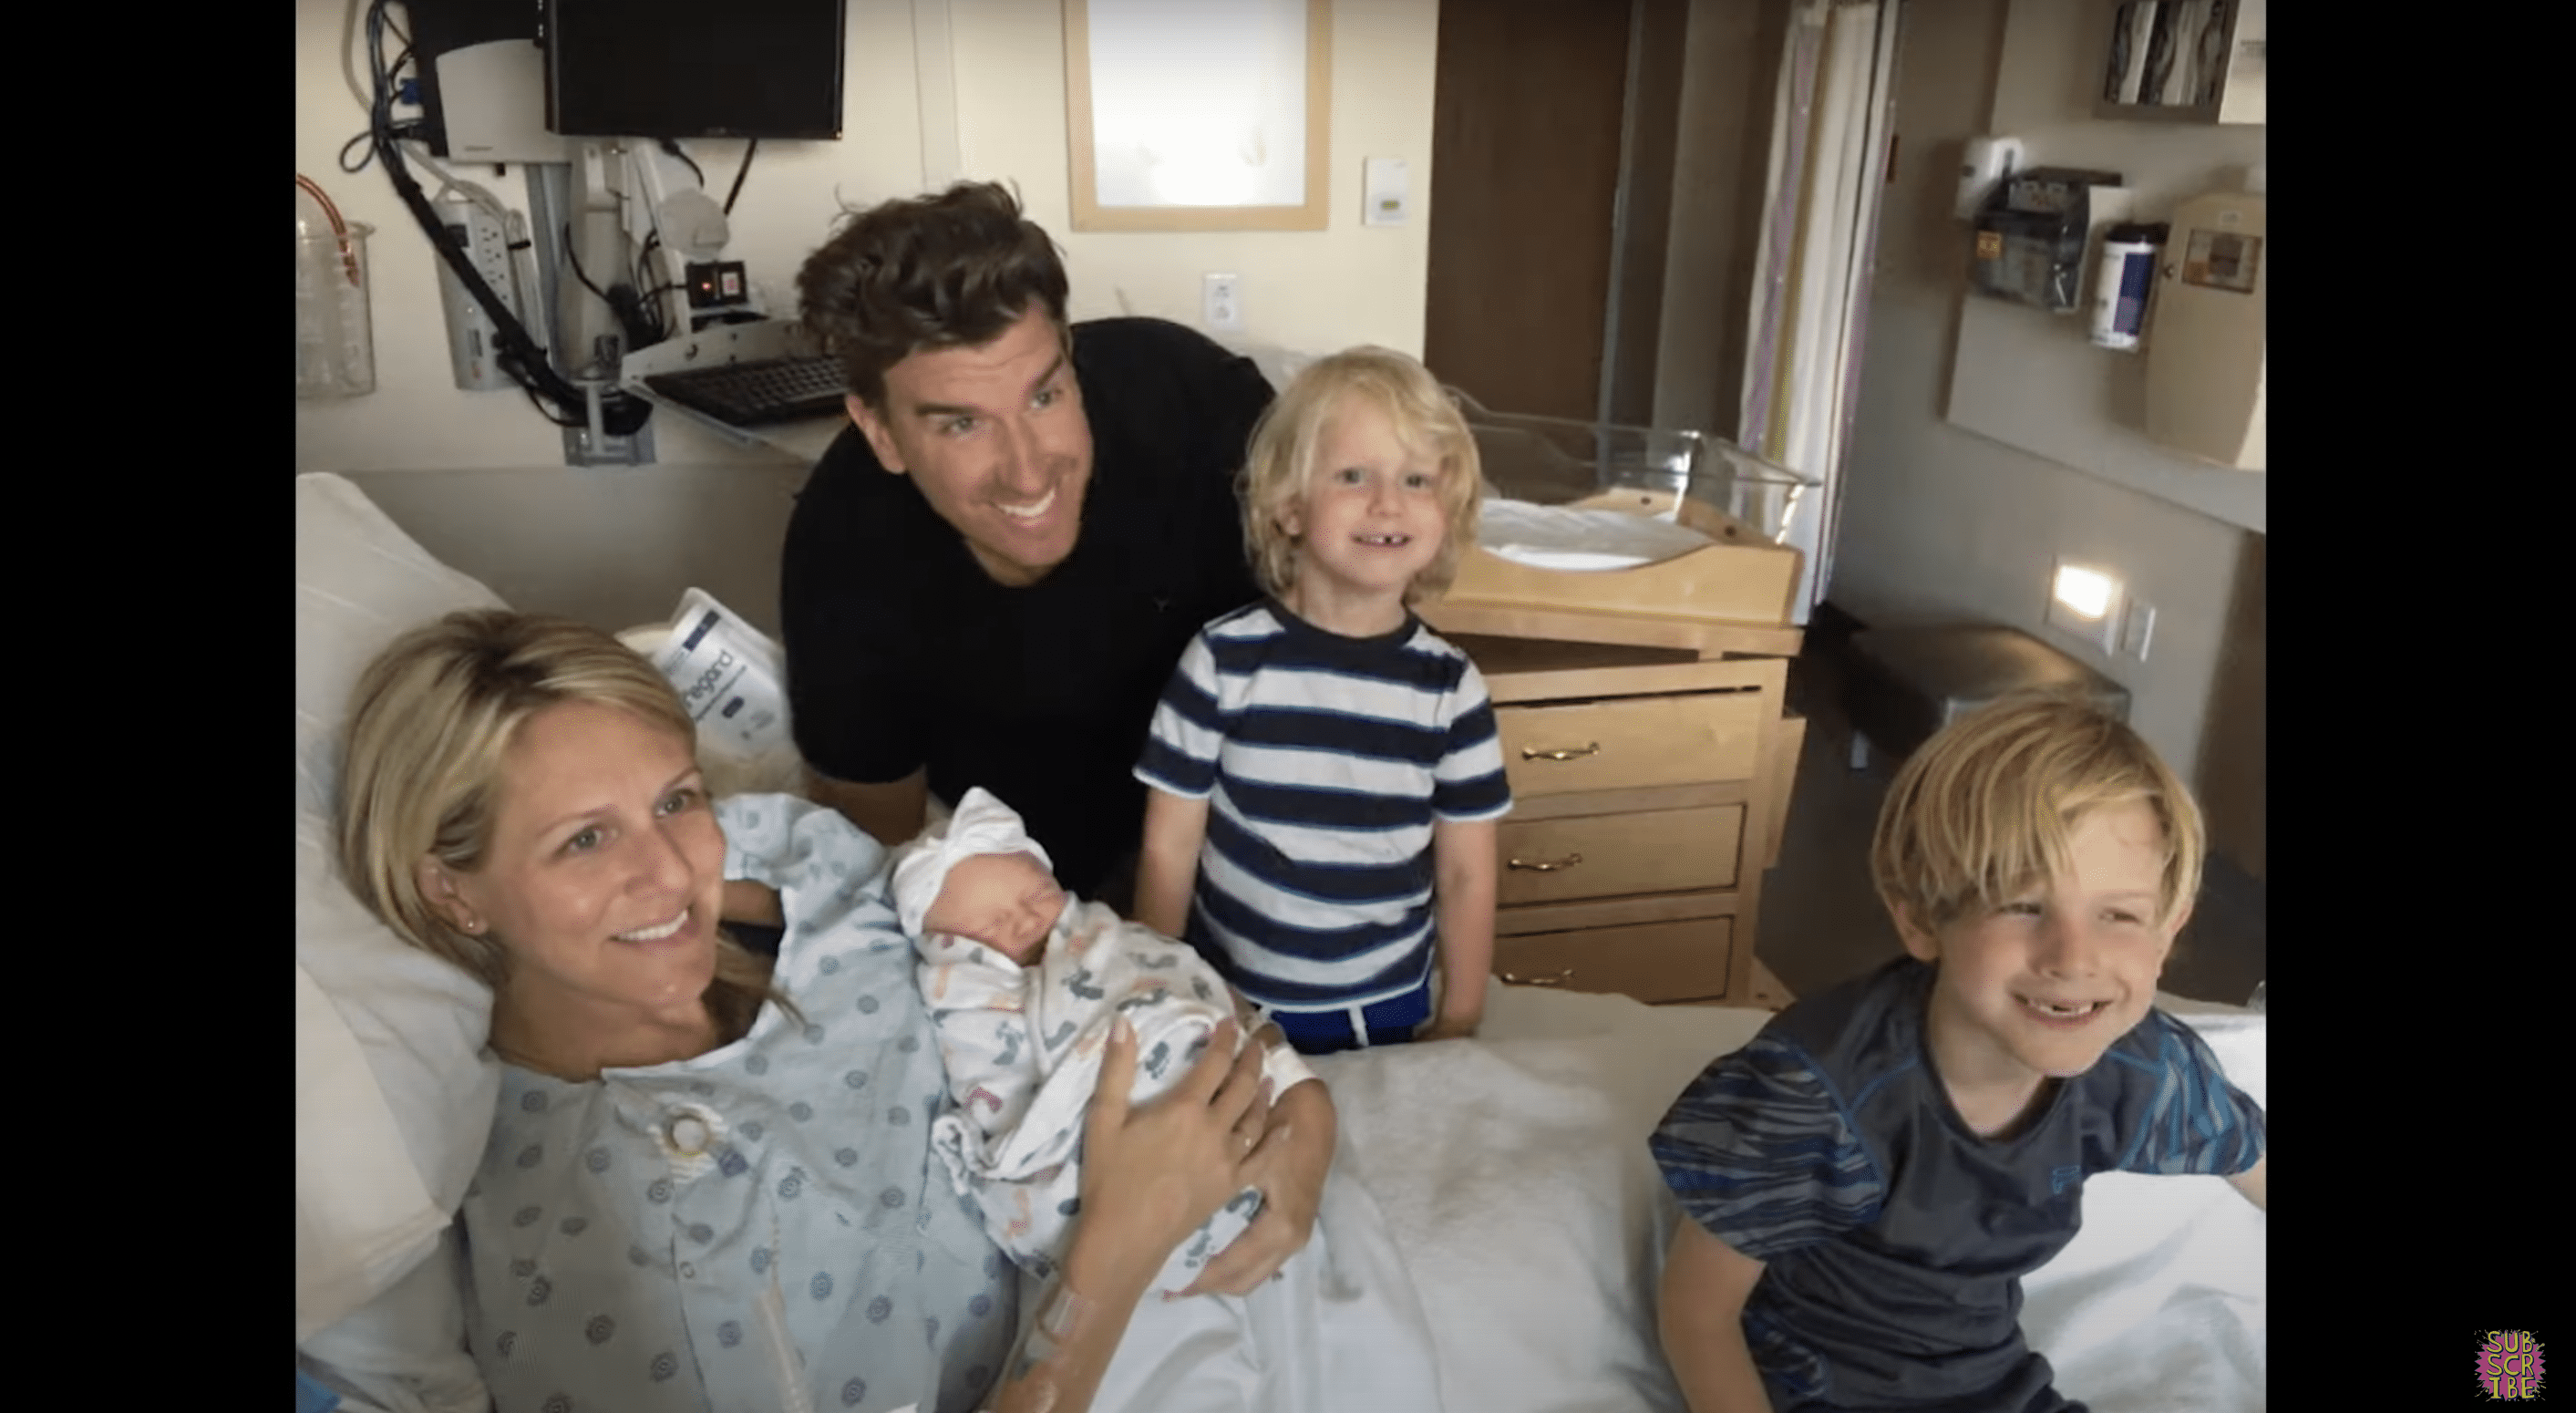 Megan and Greg Haupt with their three children, Henry, Max, and Jane. | Source: YouTube.com/GoshDarnGreg